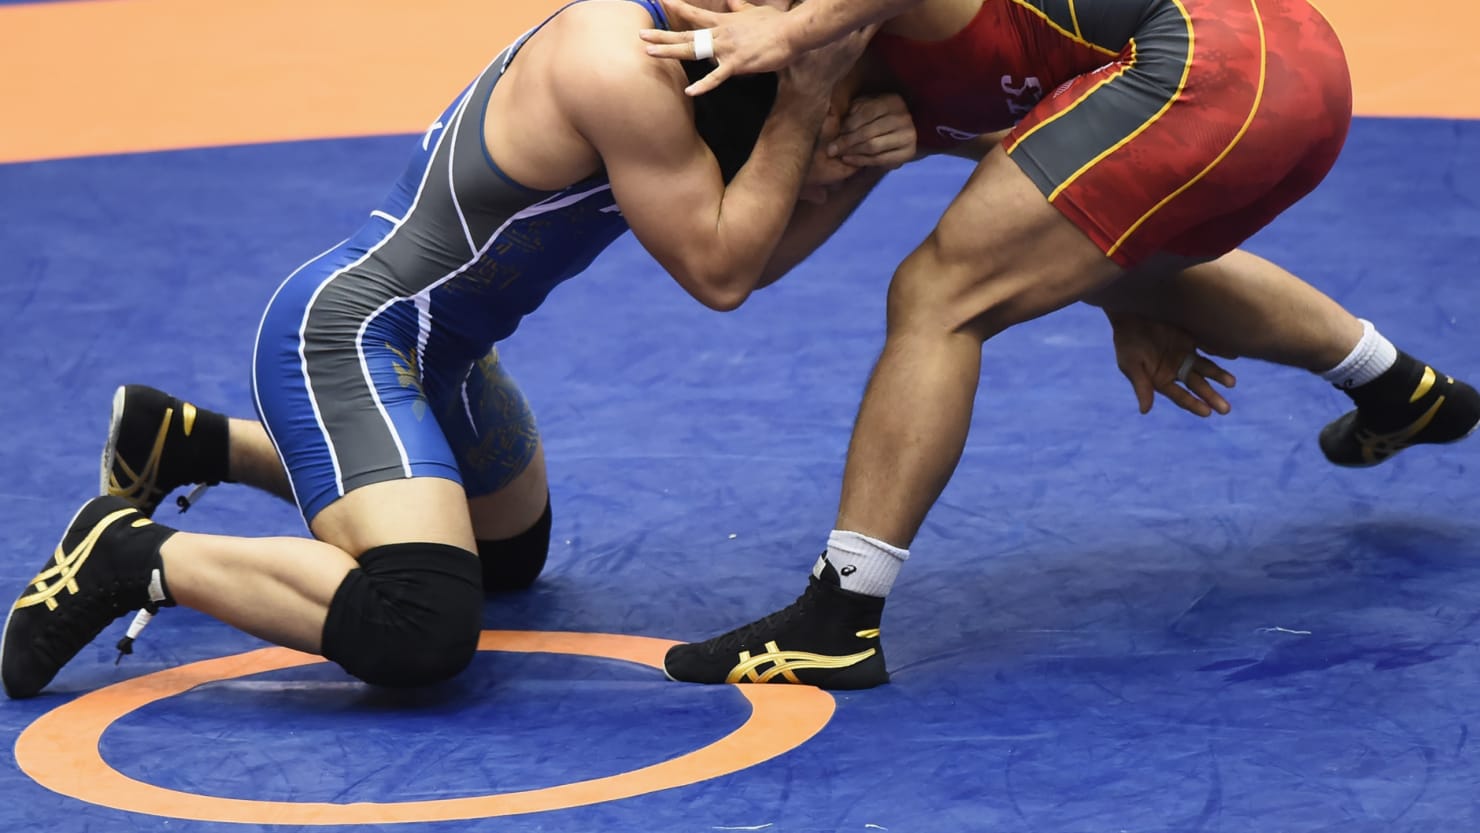 Watch Referee Forced High School Wrestler to Cut Off Dreadlocks Before Match hq nude photo